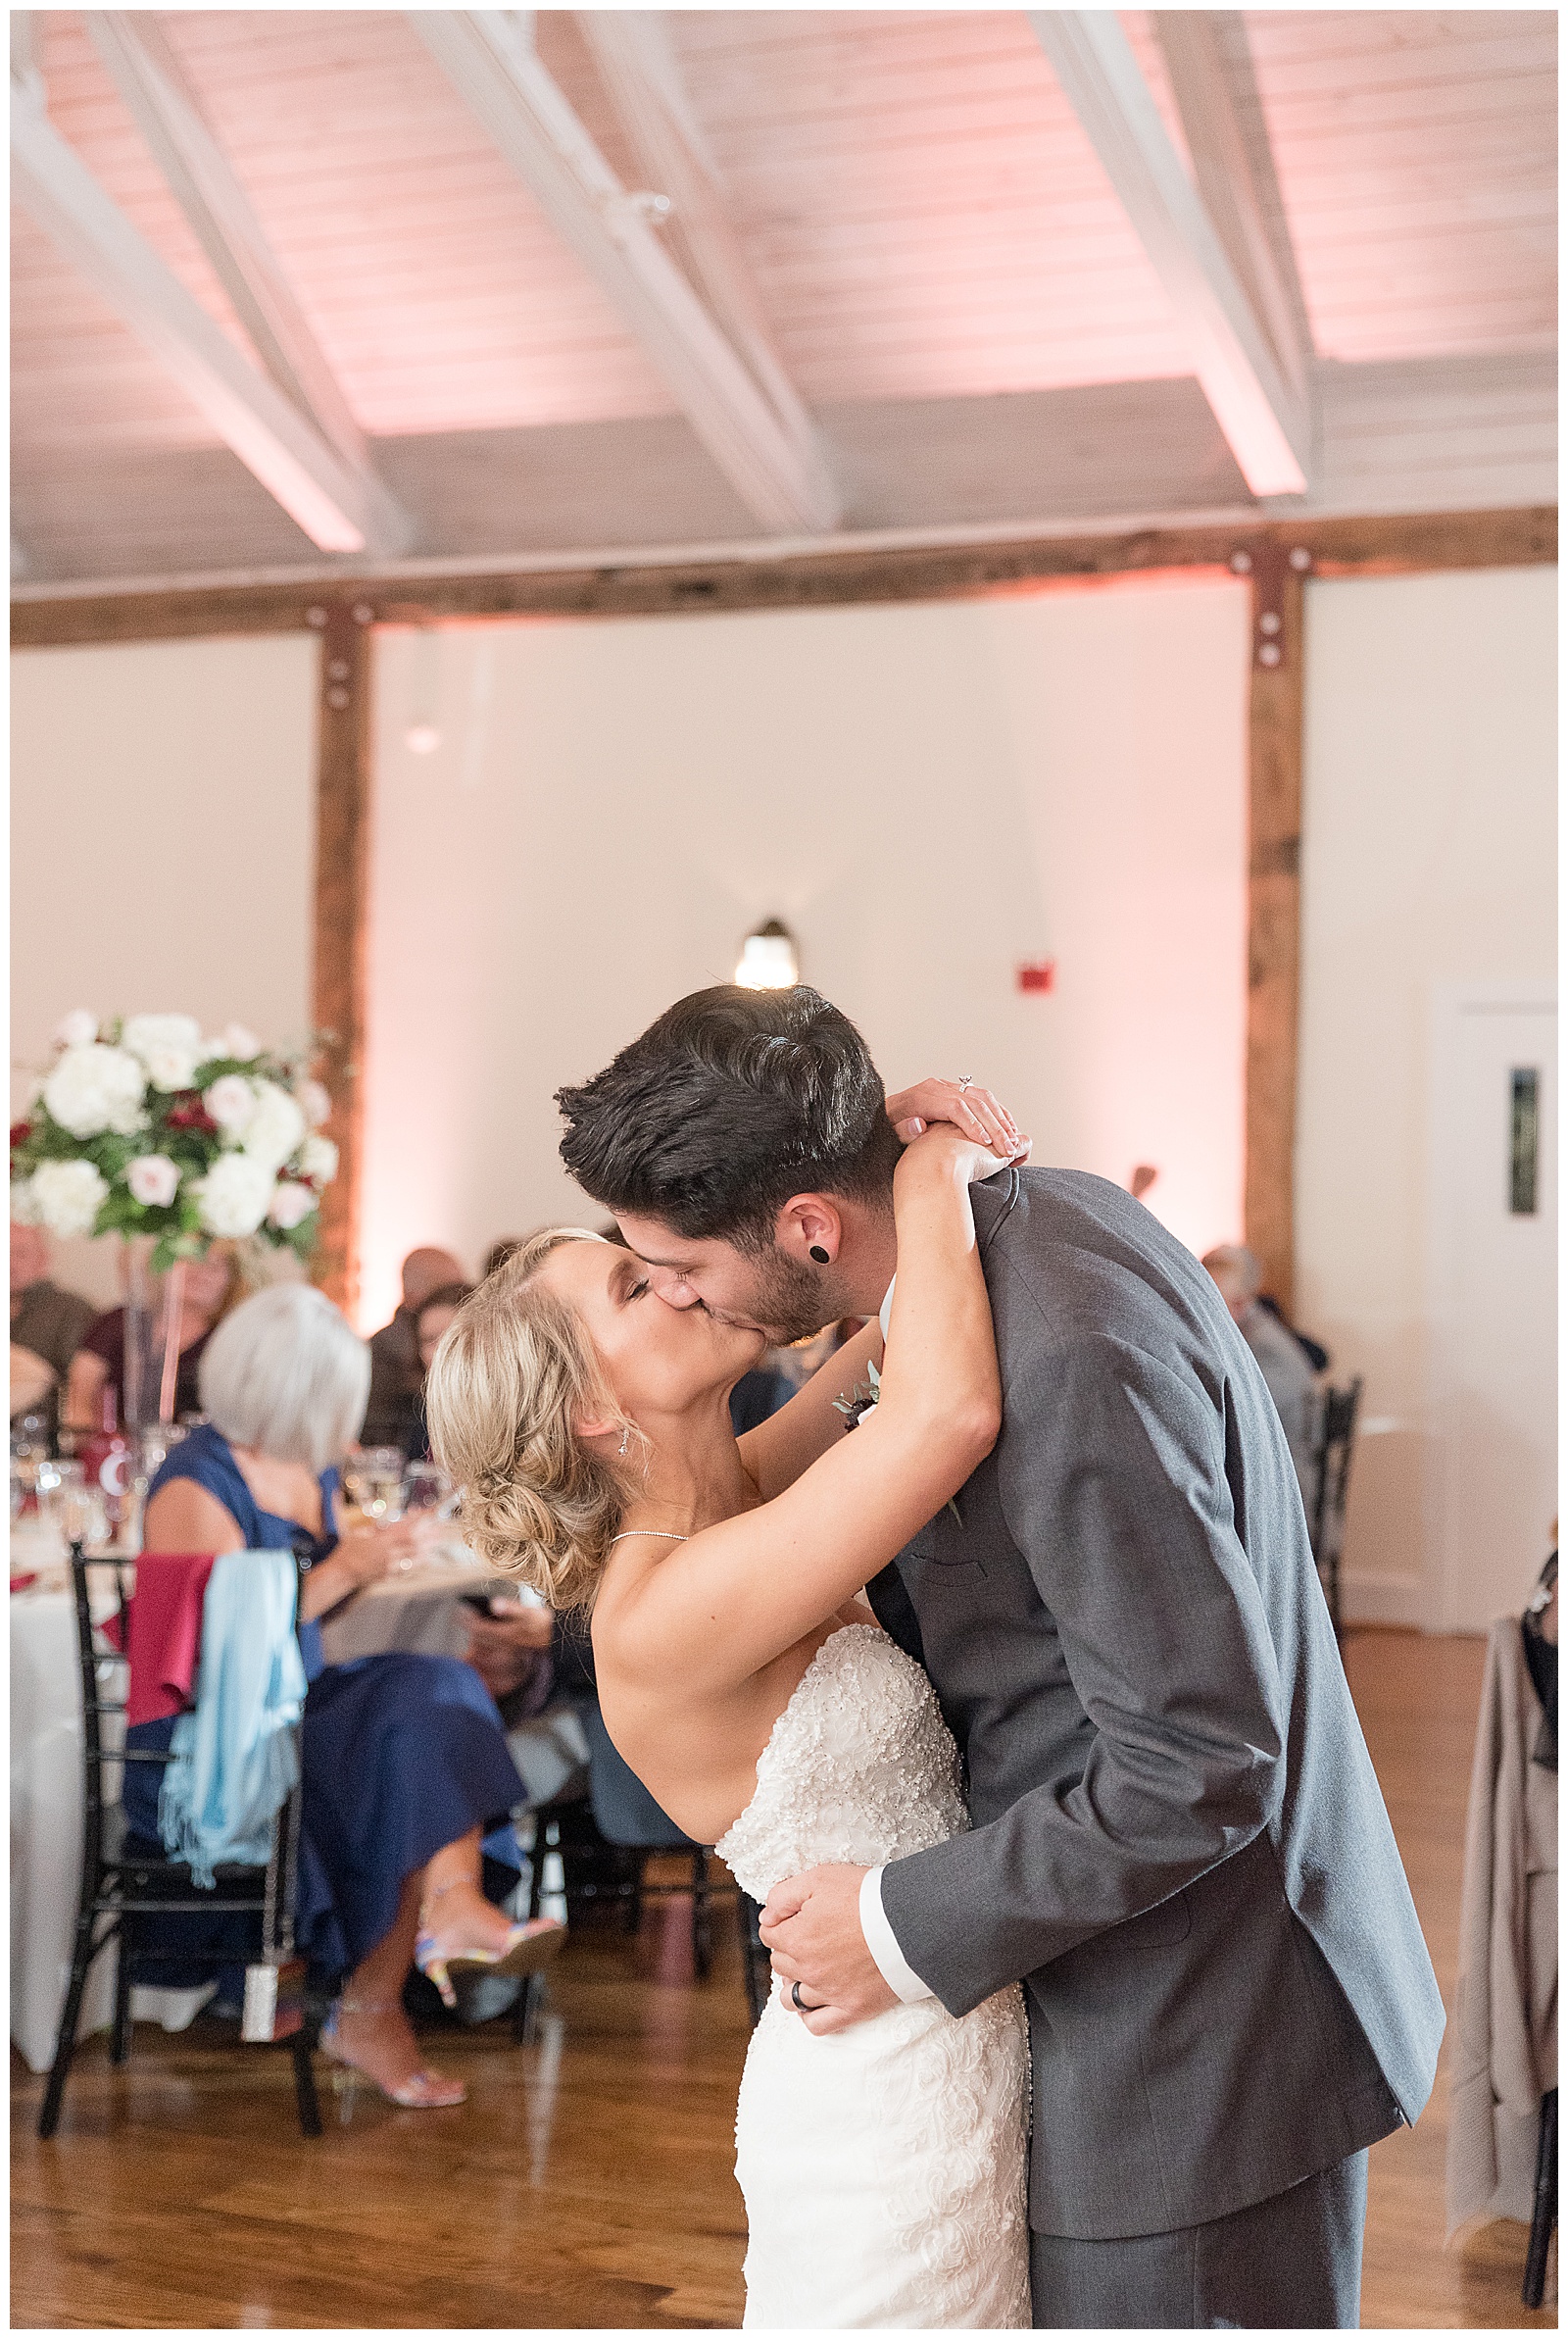 groom slightly dipping bride back as they kiss during during their first dance at reception surrounded by guests